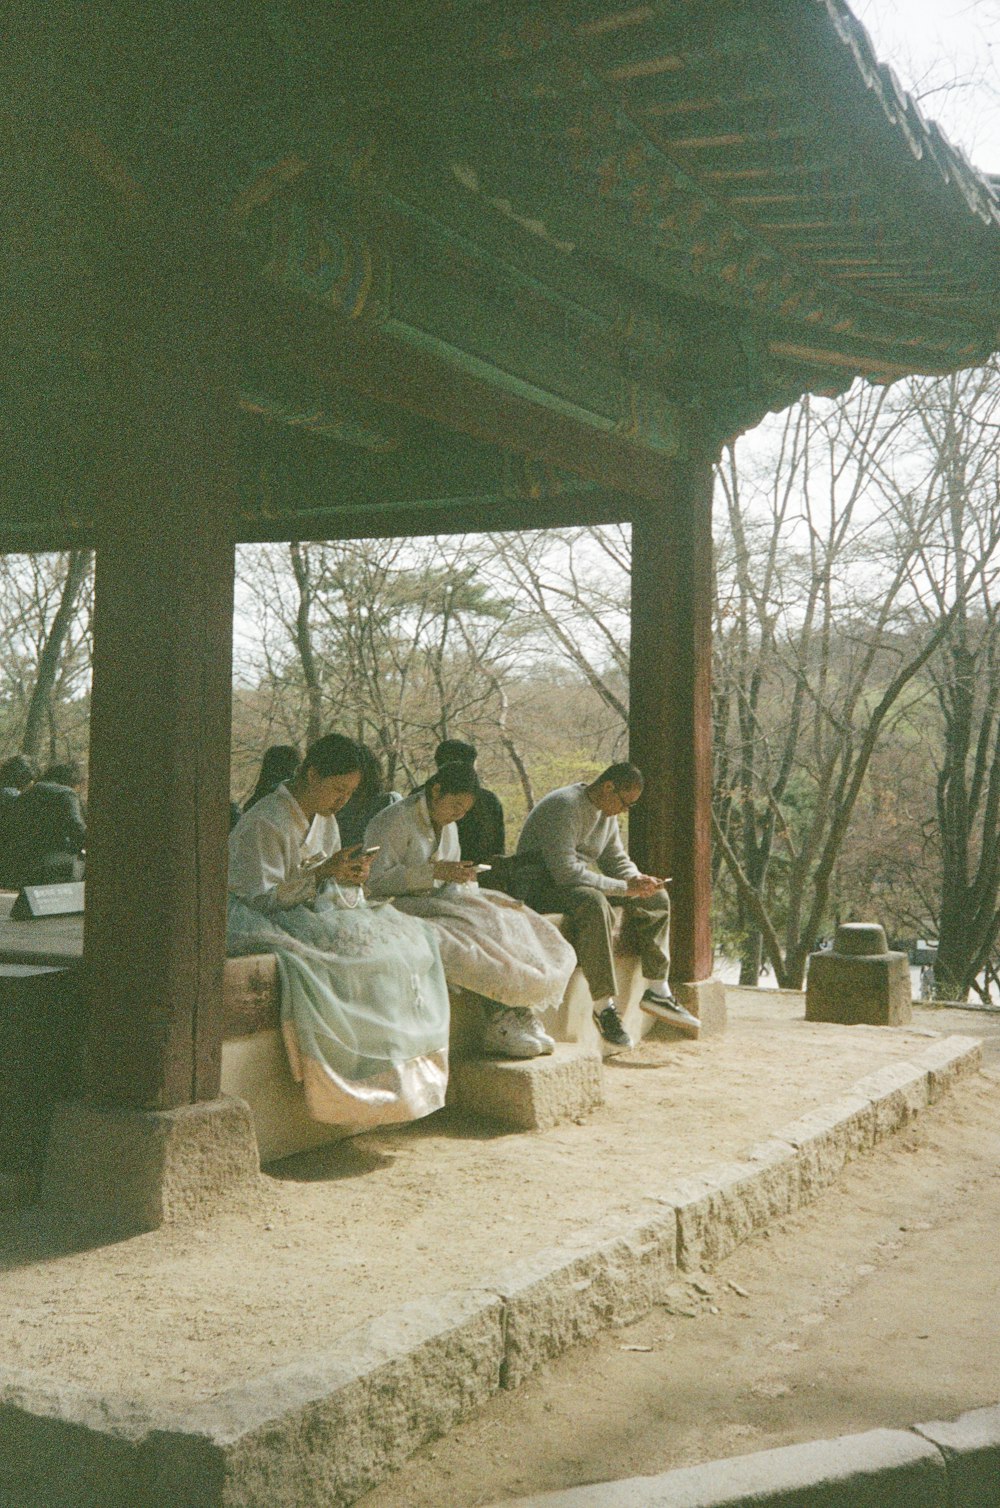 a group of people sitting under a wooden structure